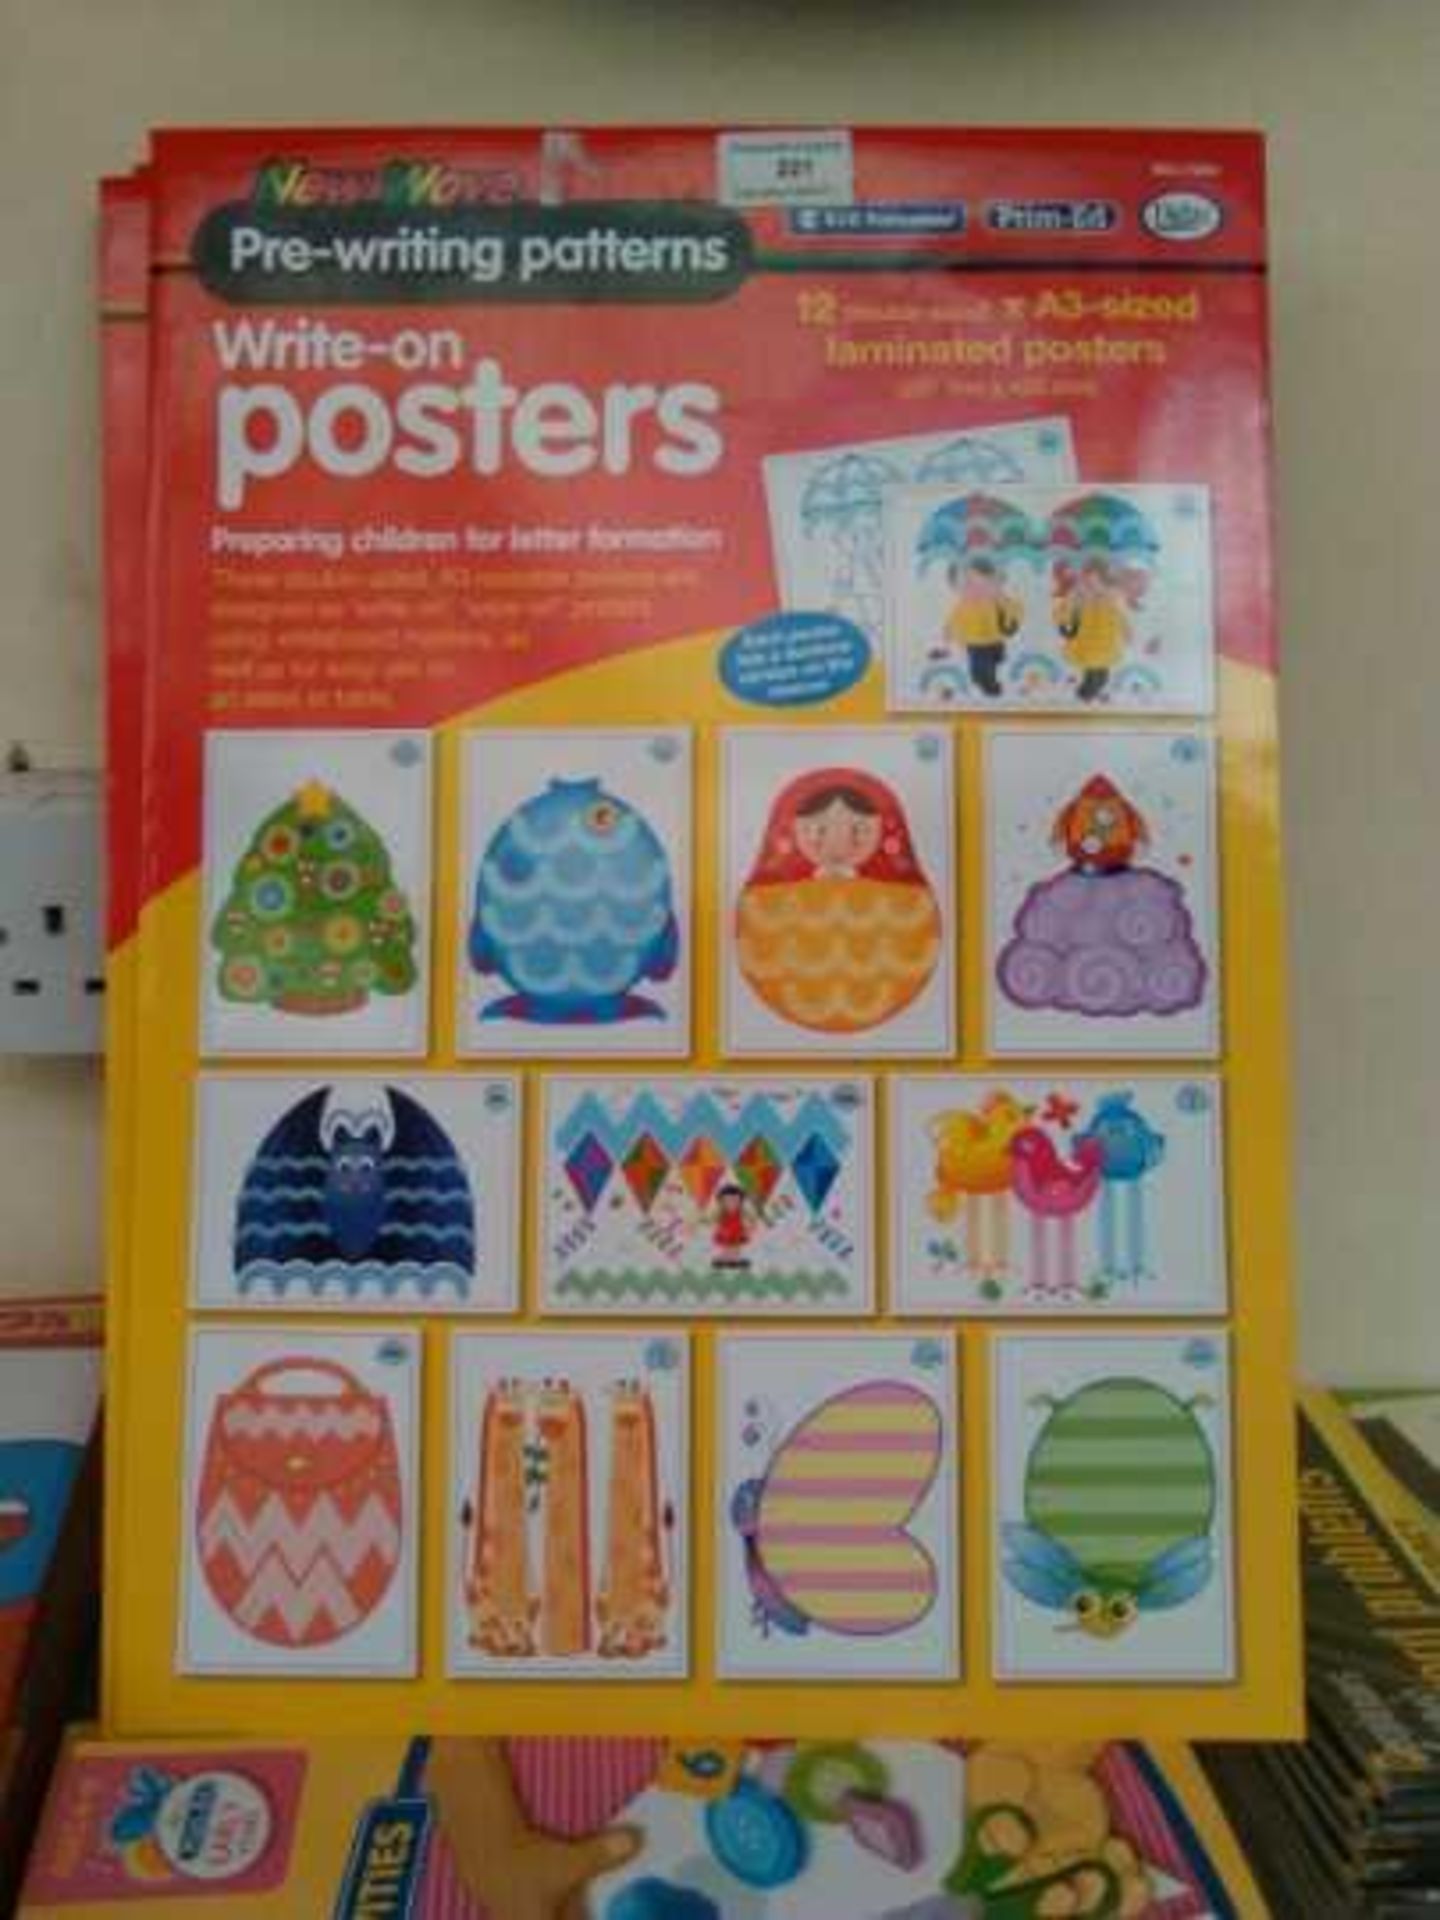 5x Packs of 12 A3 New wave, pre-writing posters, new in packaging. Total RRP £74.95         SKU